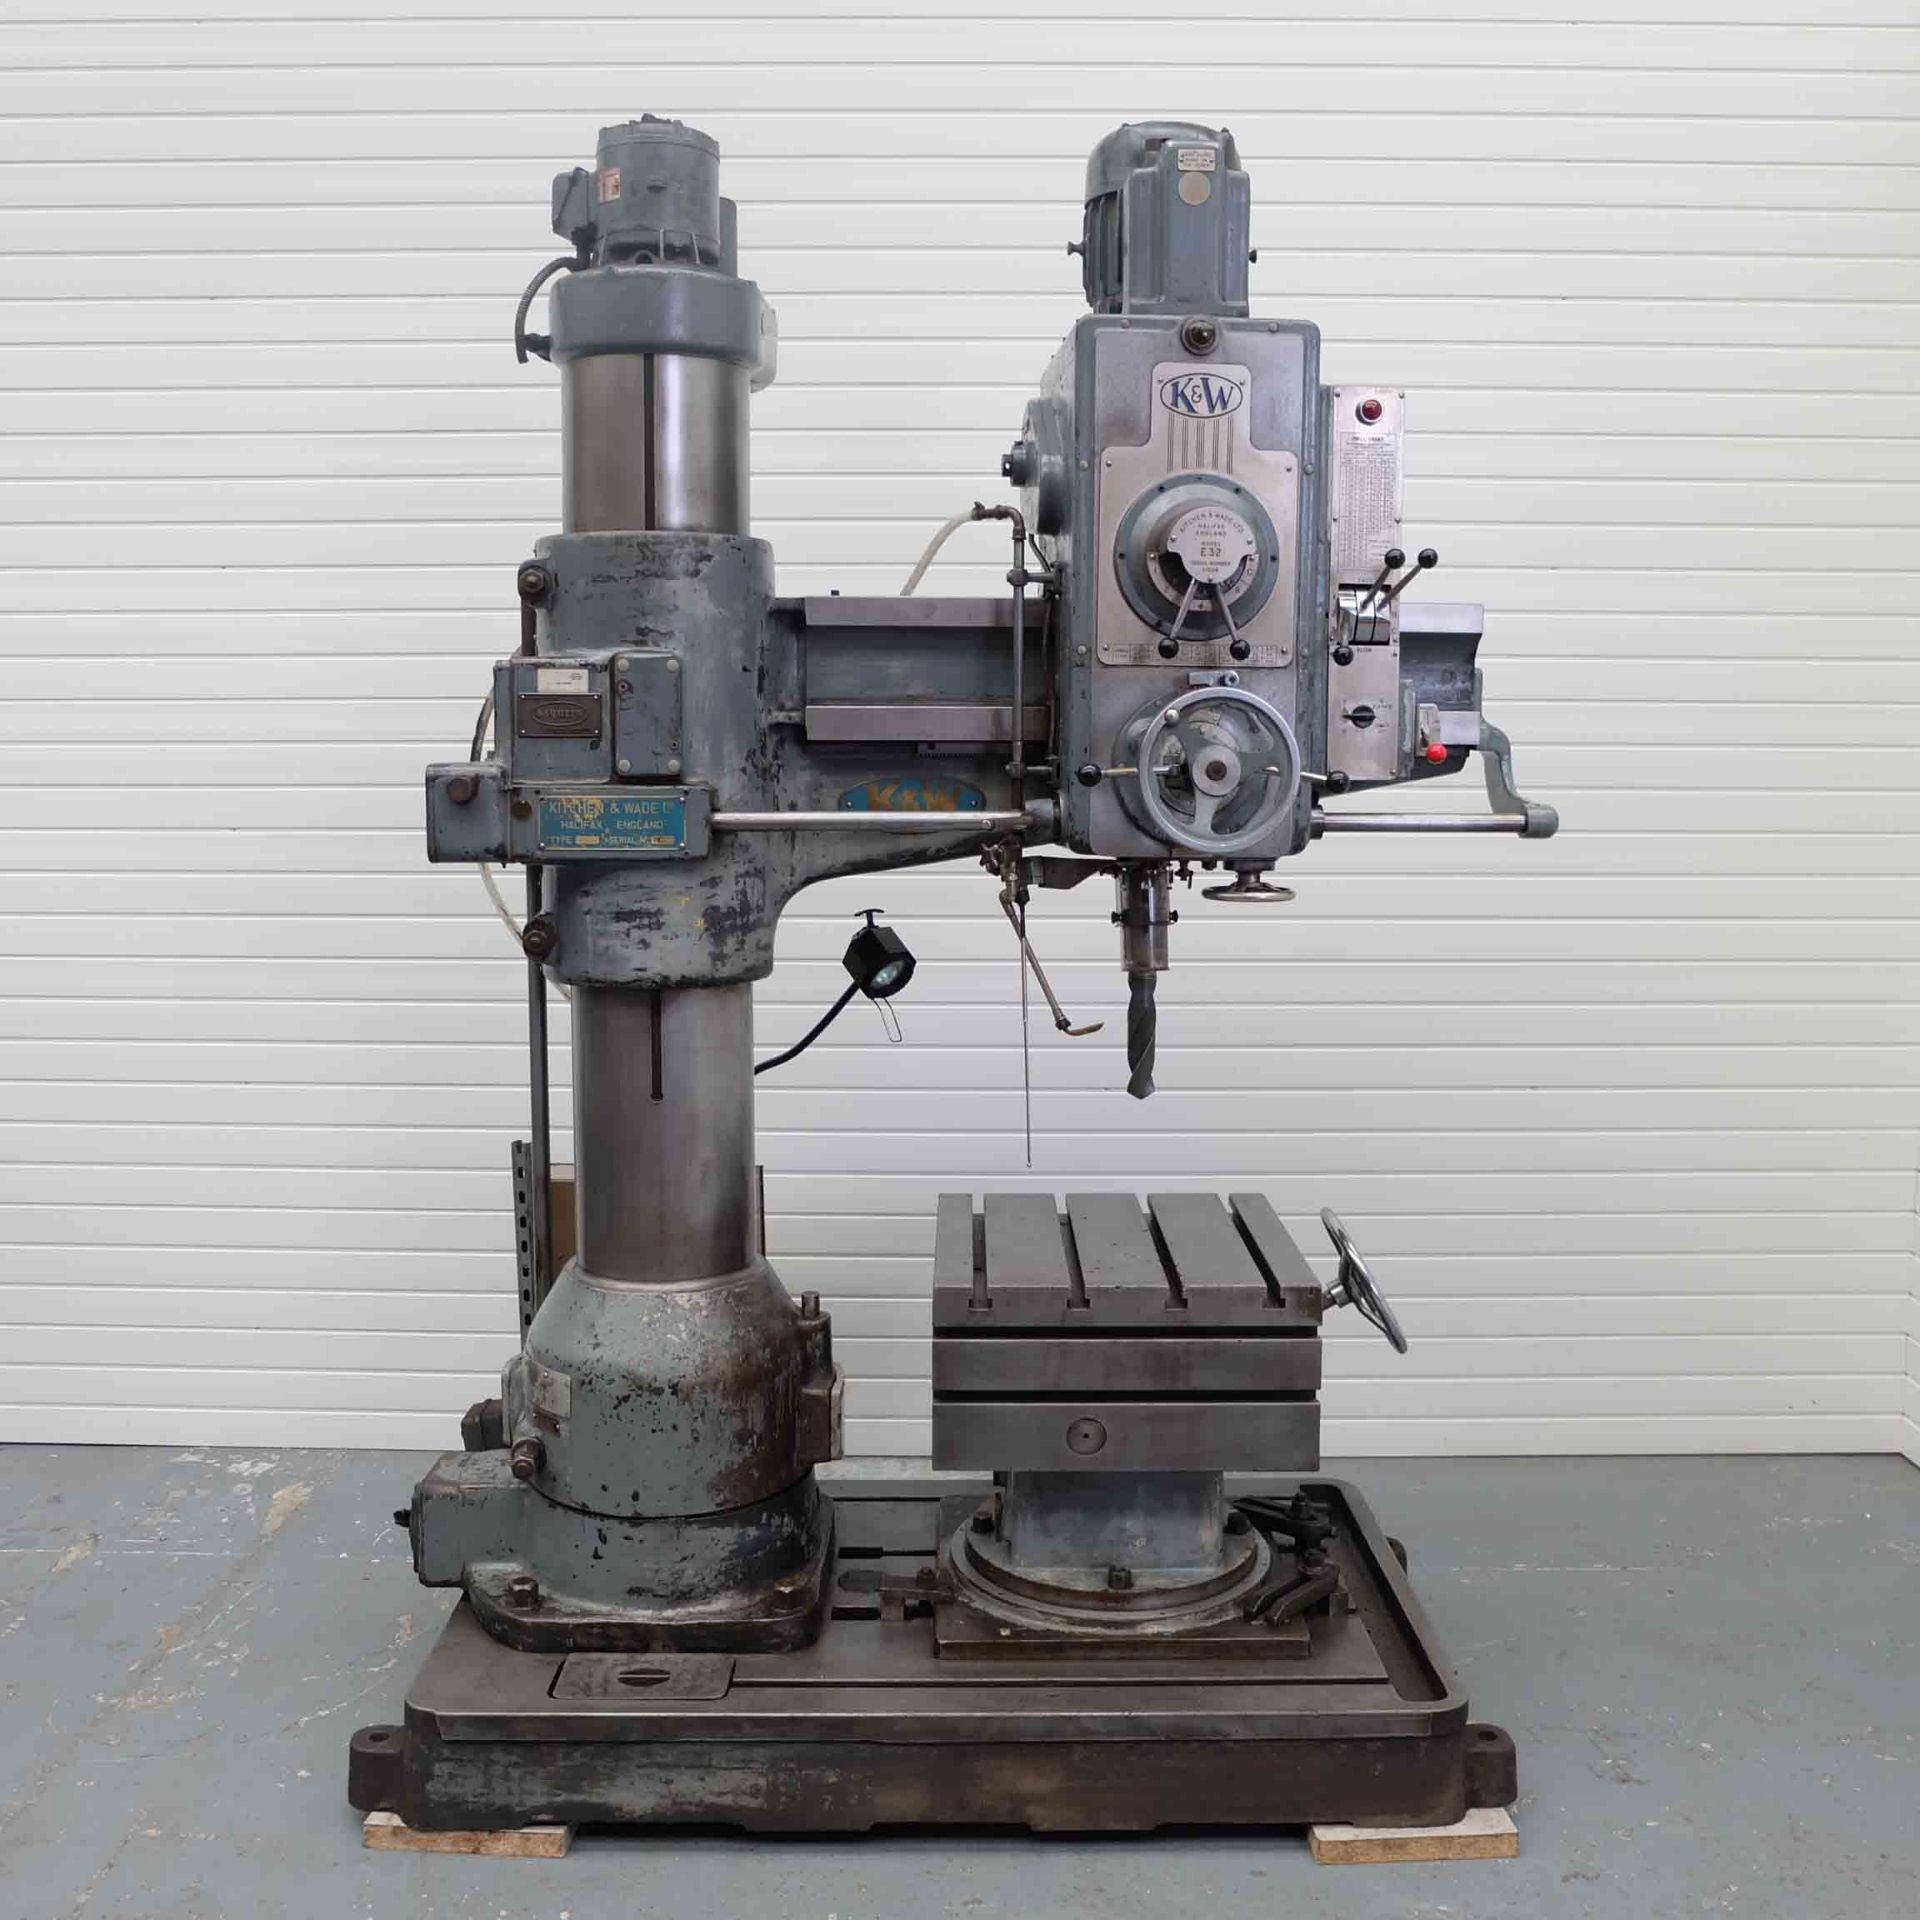 Kitchen & Wade 3'6" E2 Radial Arm Drill.